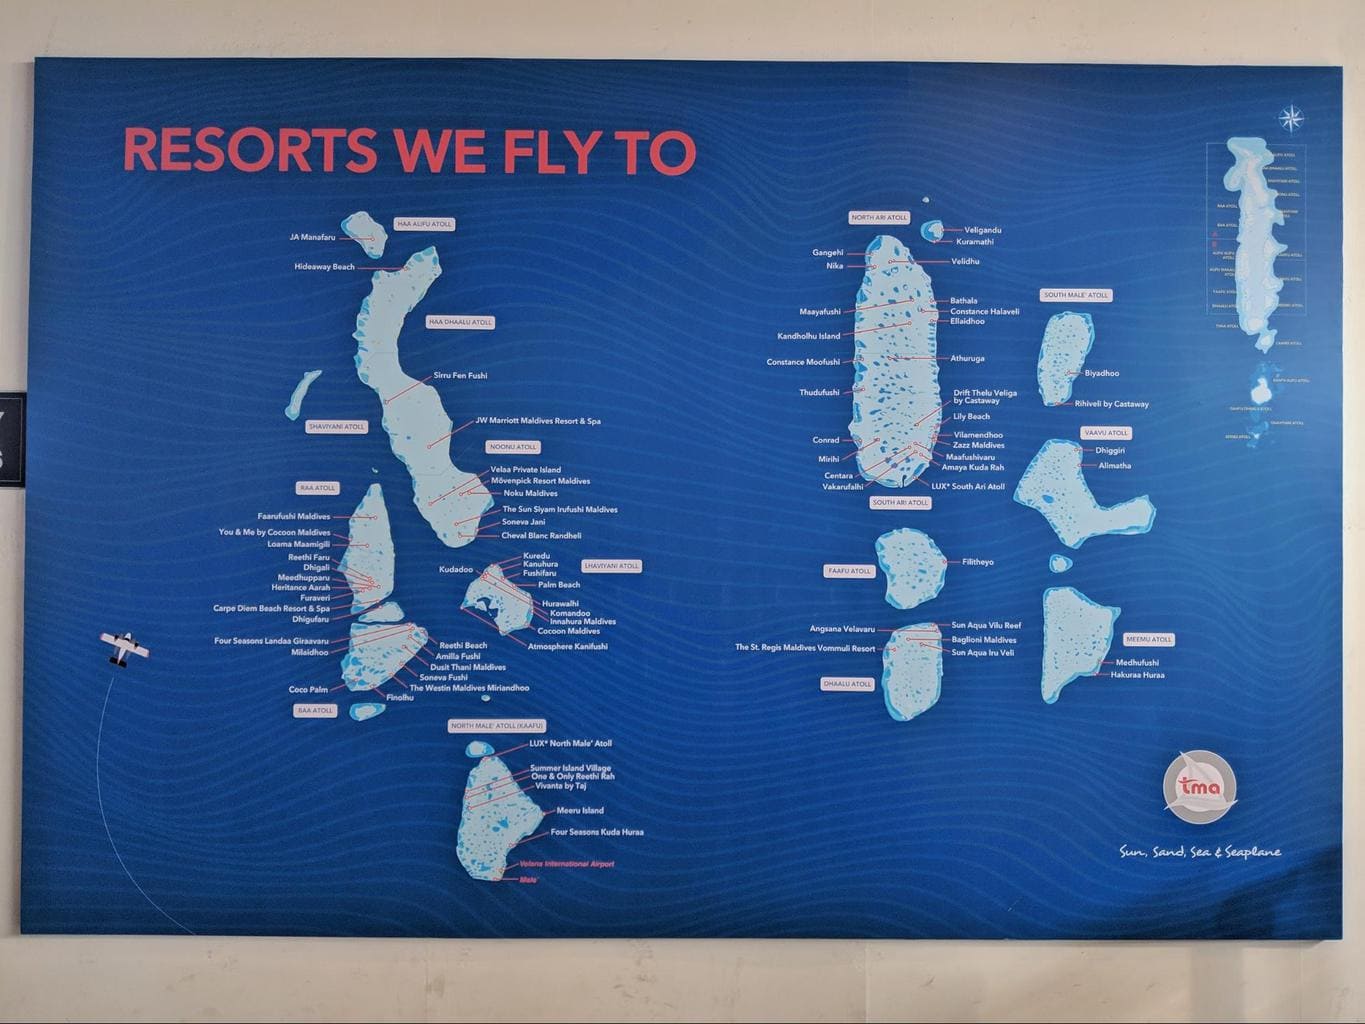 Resorts reachable by seaplane from Trans-Maldivian Airlines